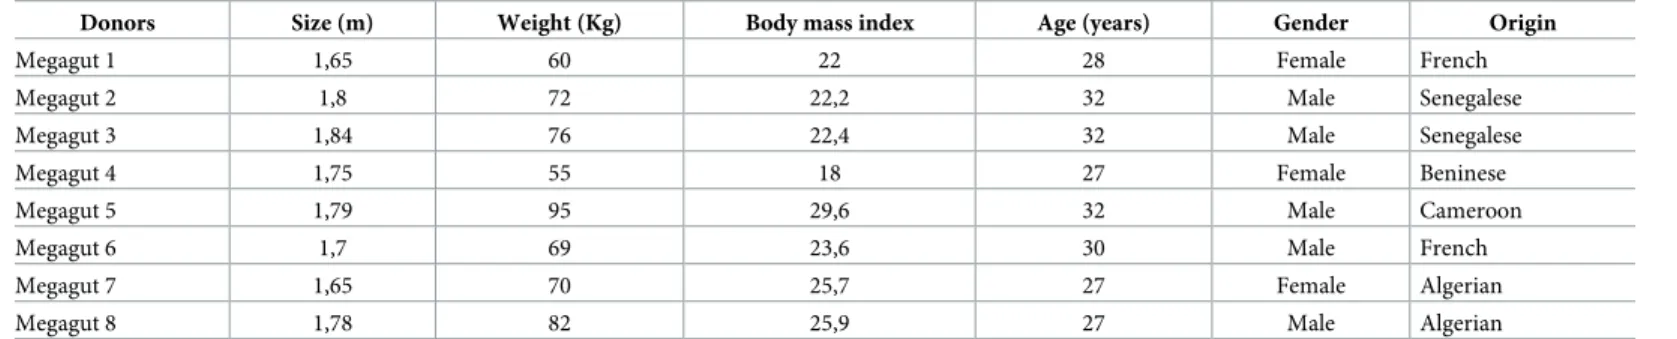 Table 1. Characteristics from the donors sampled as a part of this study.